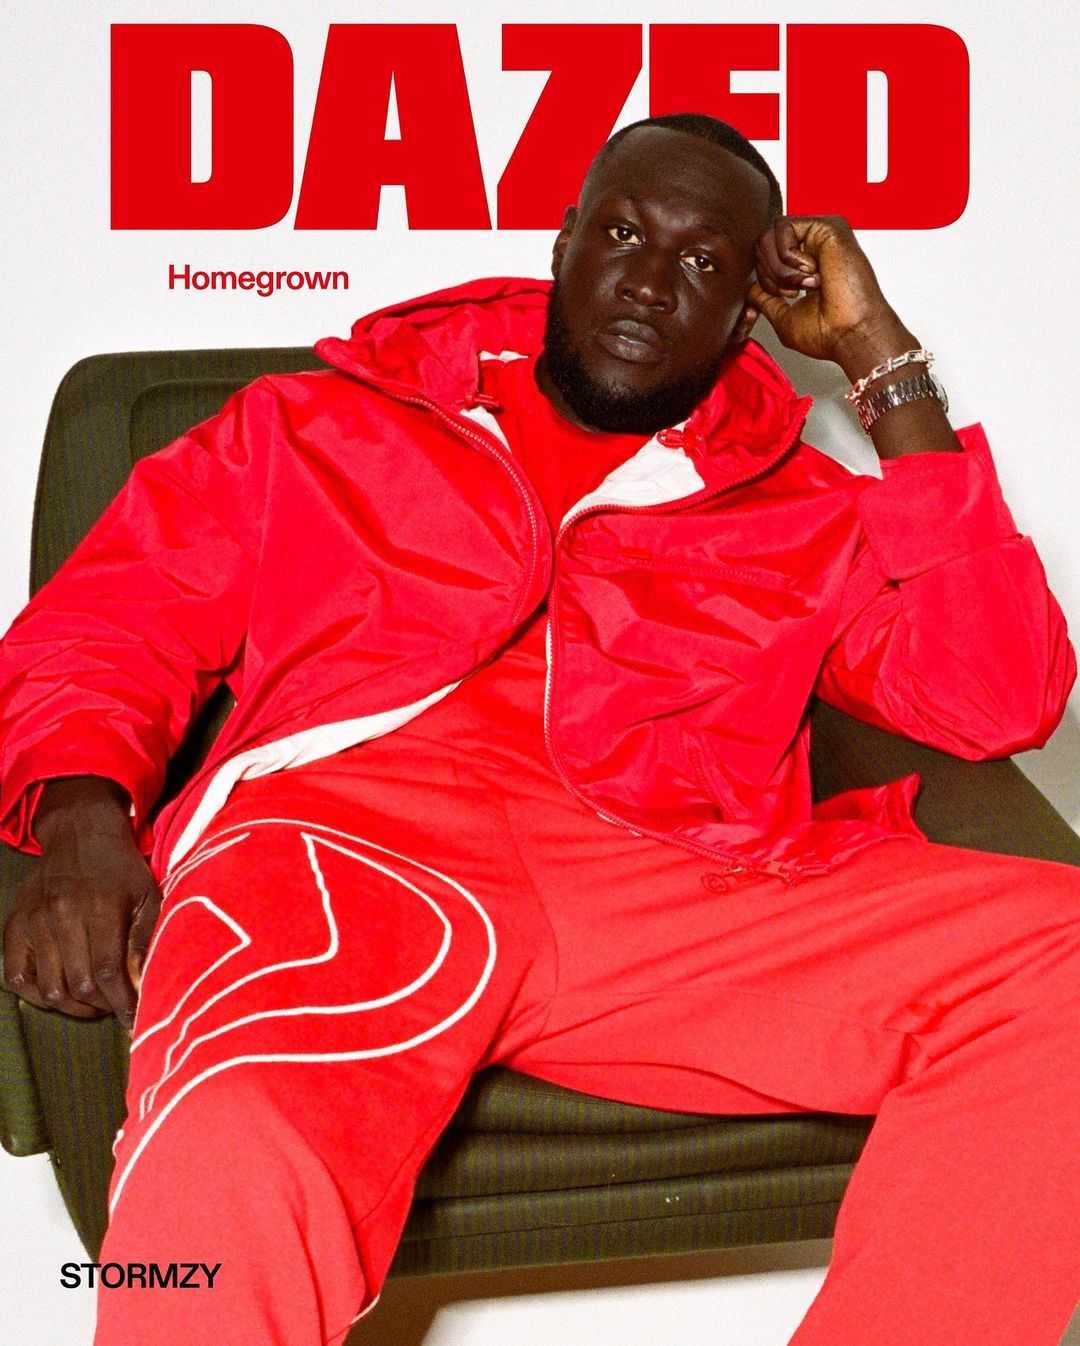 dazed - the homegrown issue - 5175